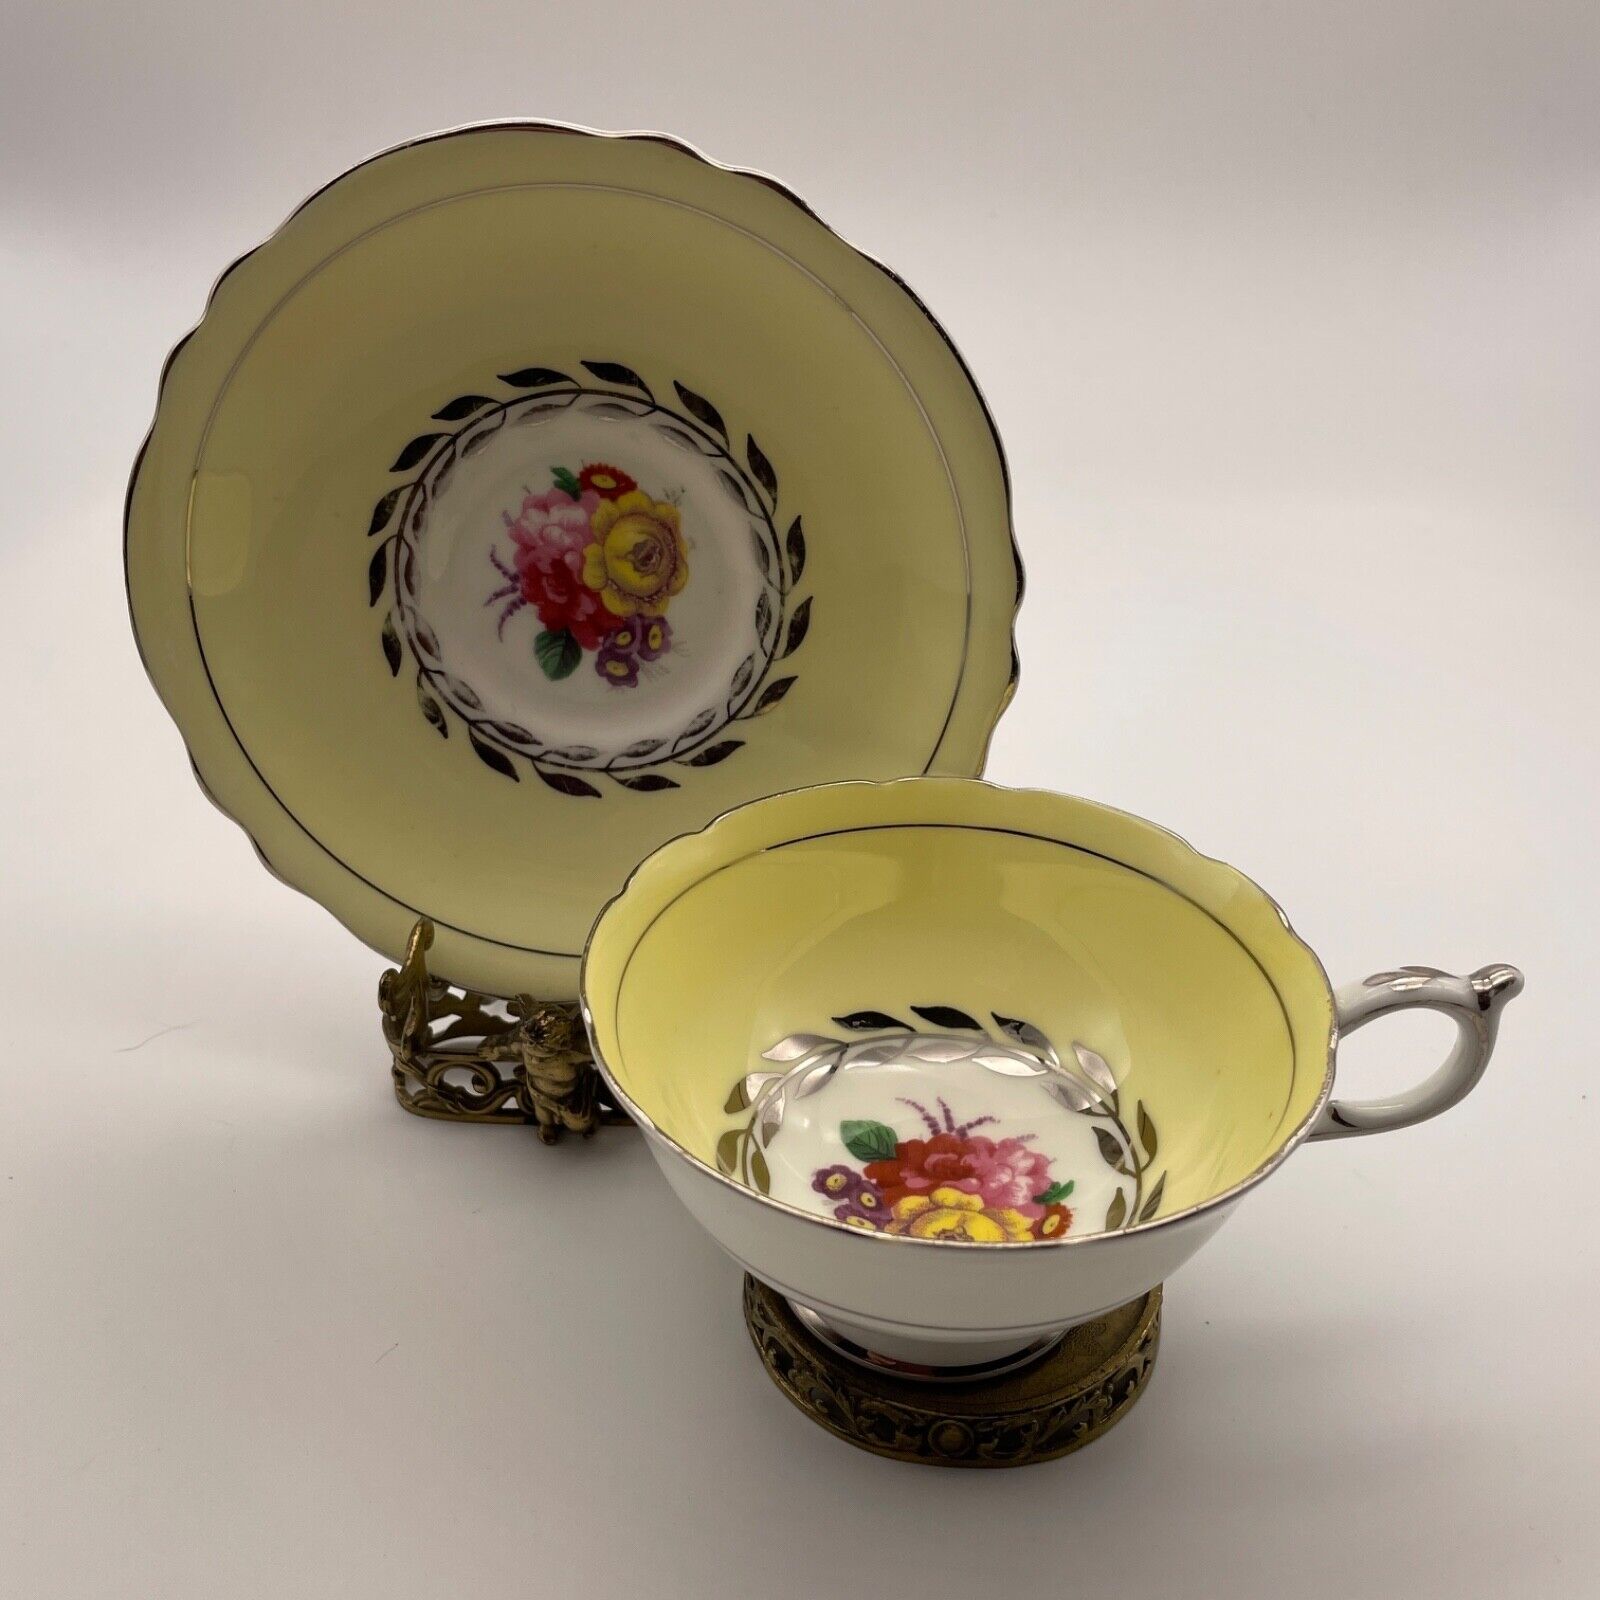 Paragon Tea Cup And Saucer Yellow White Floral Gold Leaves Trim Double Warranted